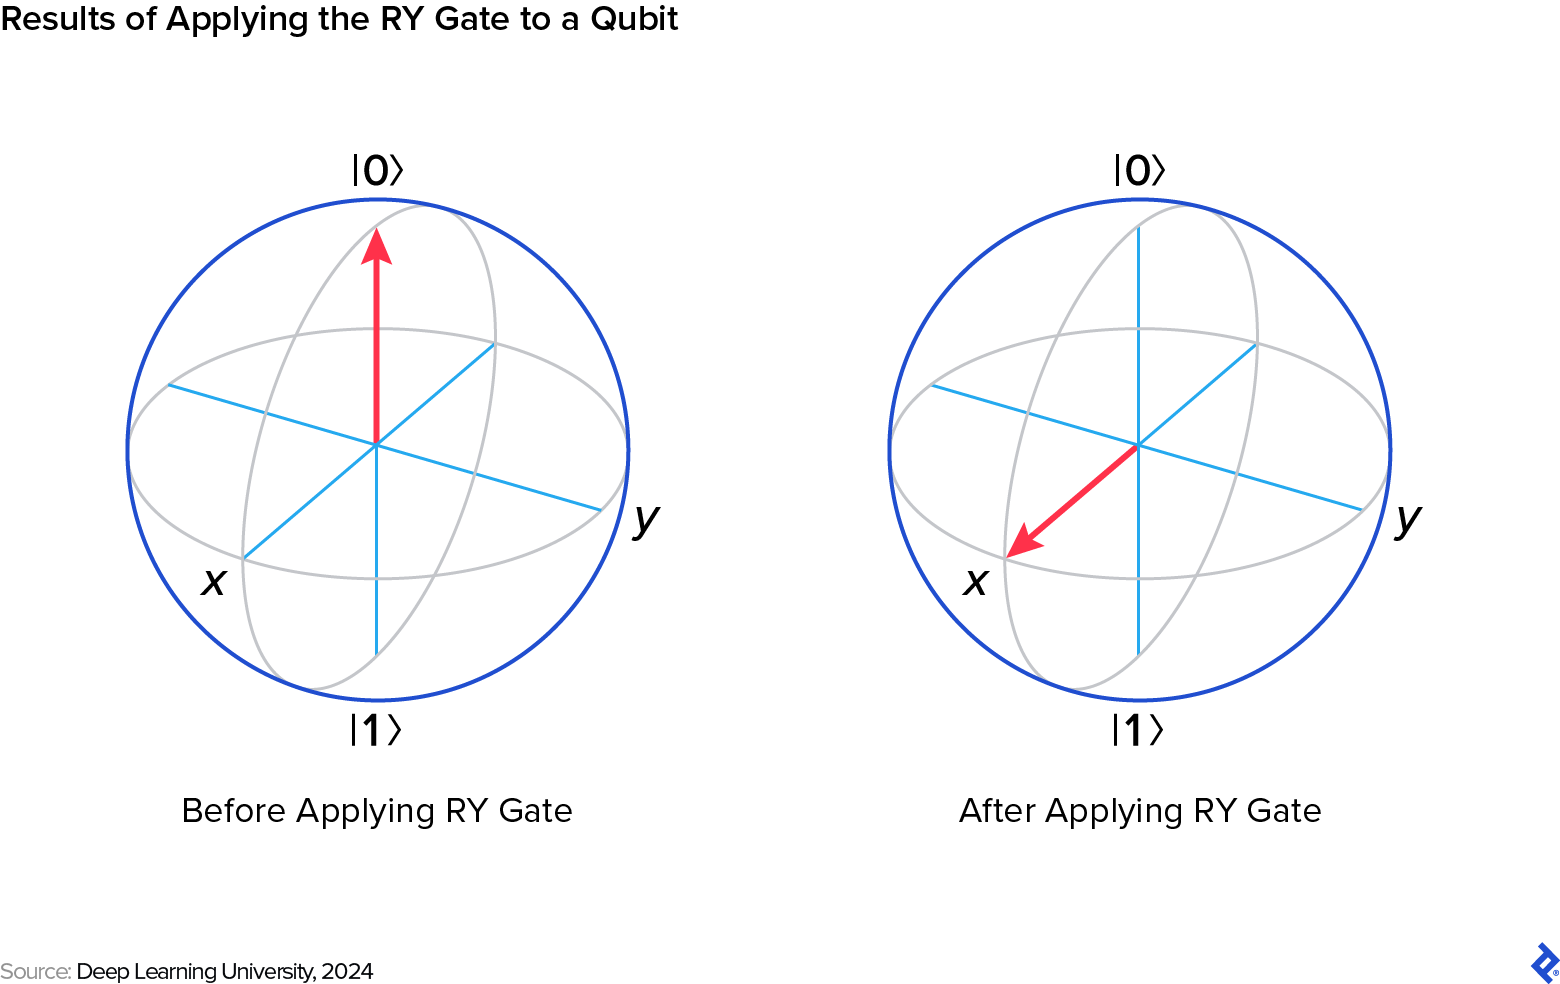 A qubit before and after the RY gate. On the left, an arrow points up to the ∣0⟩. On the right, the arrow is rotated and points to the x of the x-axis.